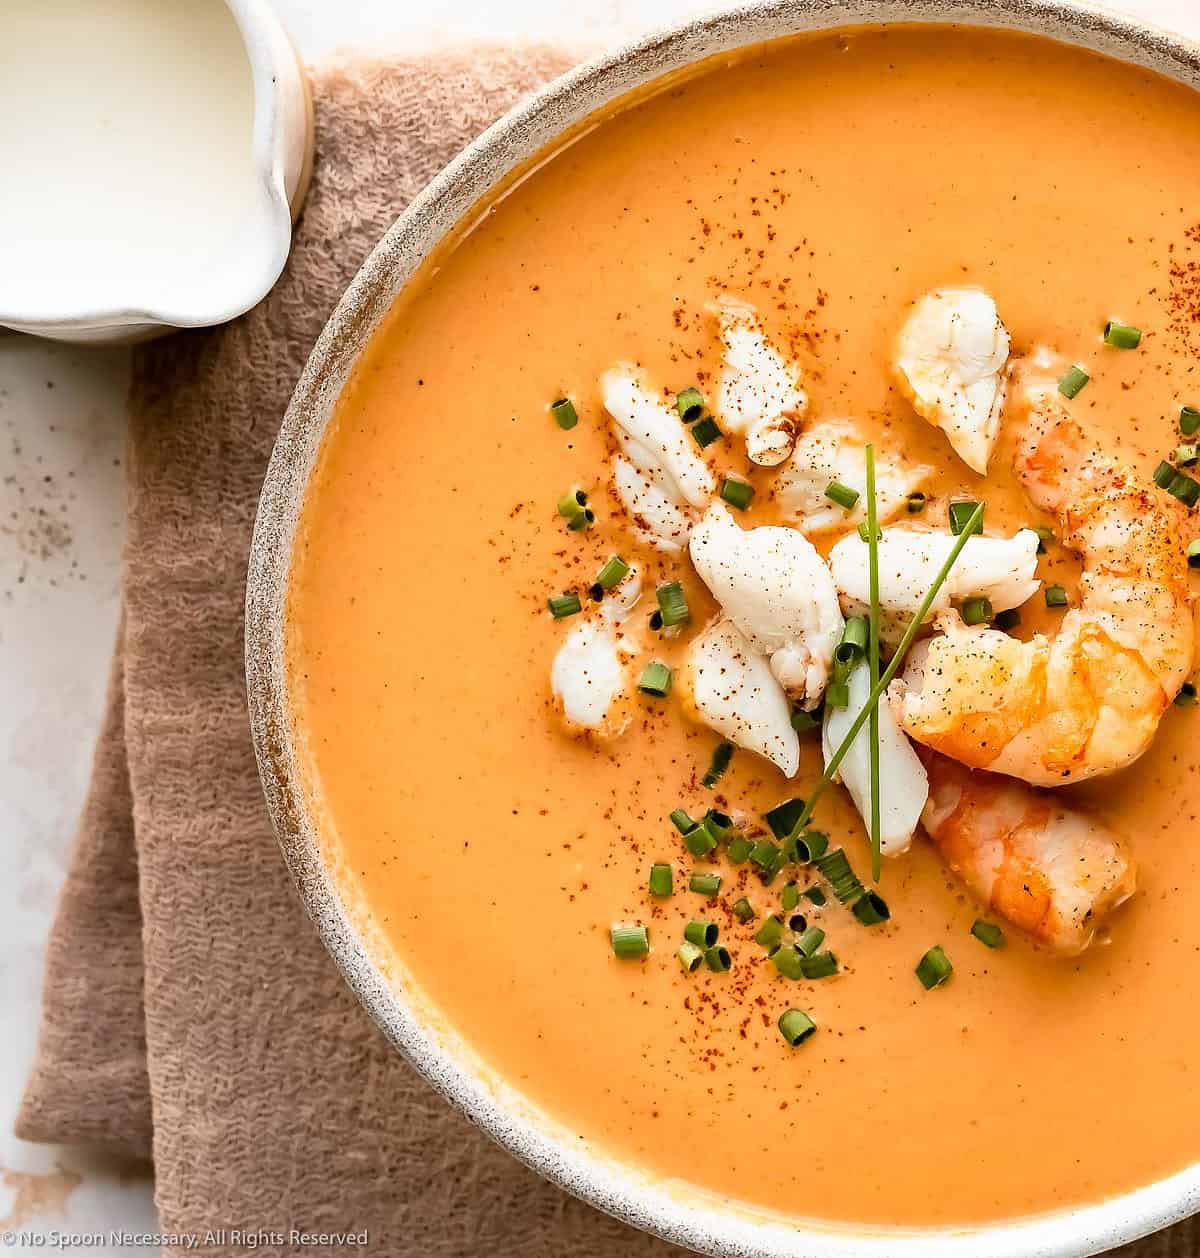  Dive into a bowl of creamy seafood bisque